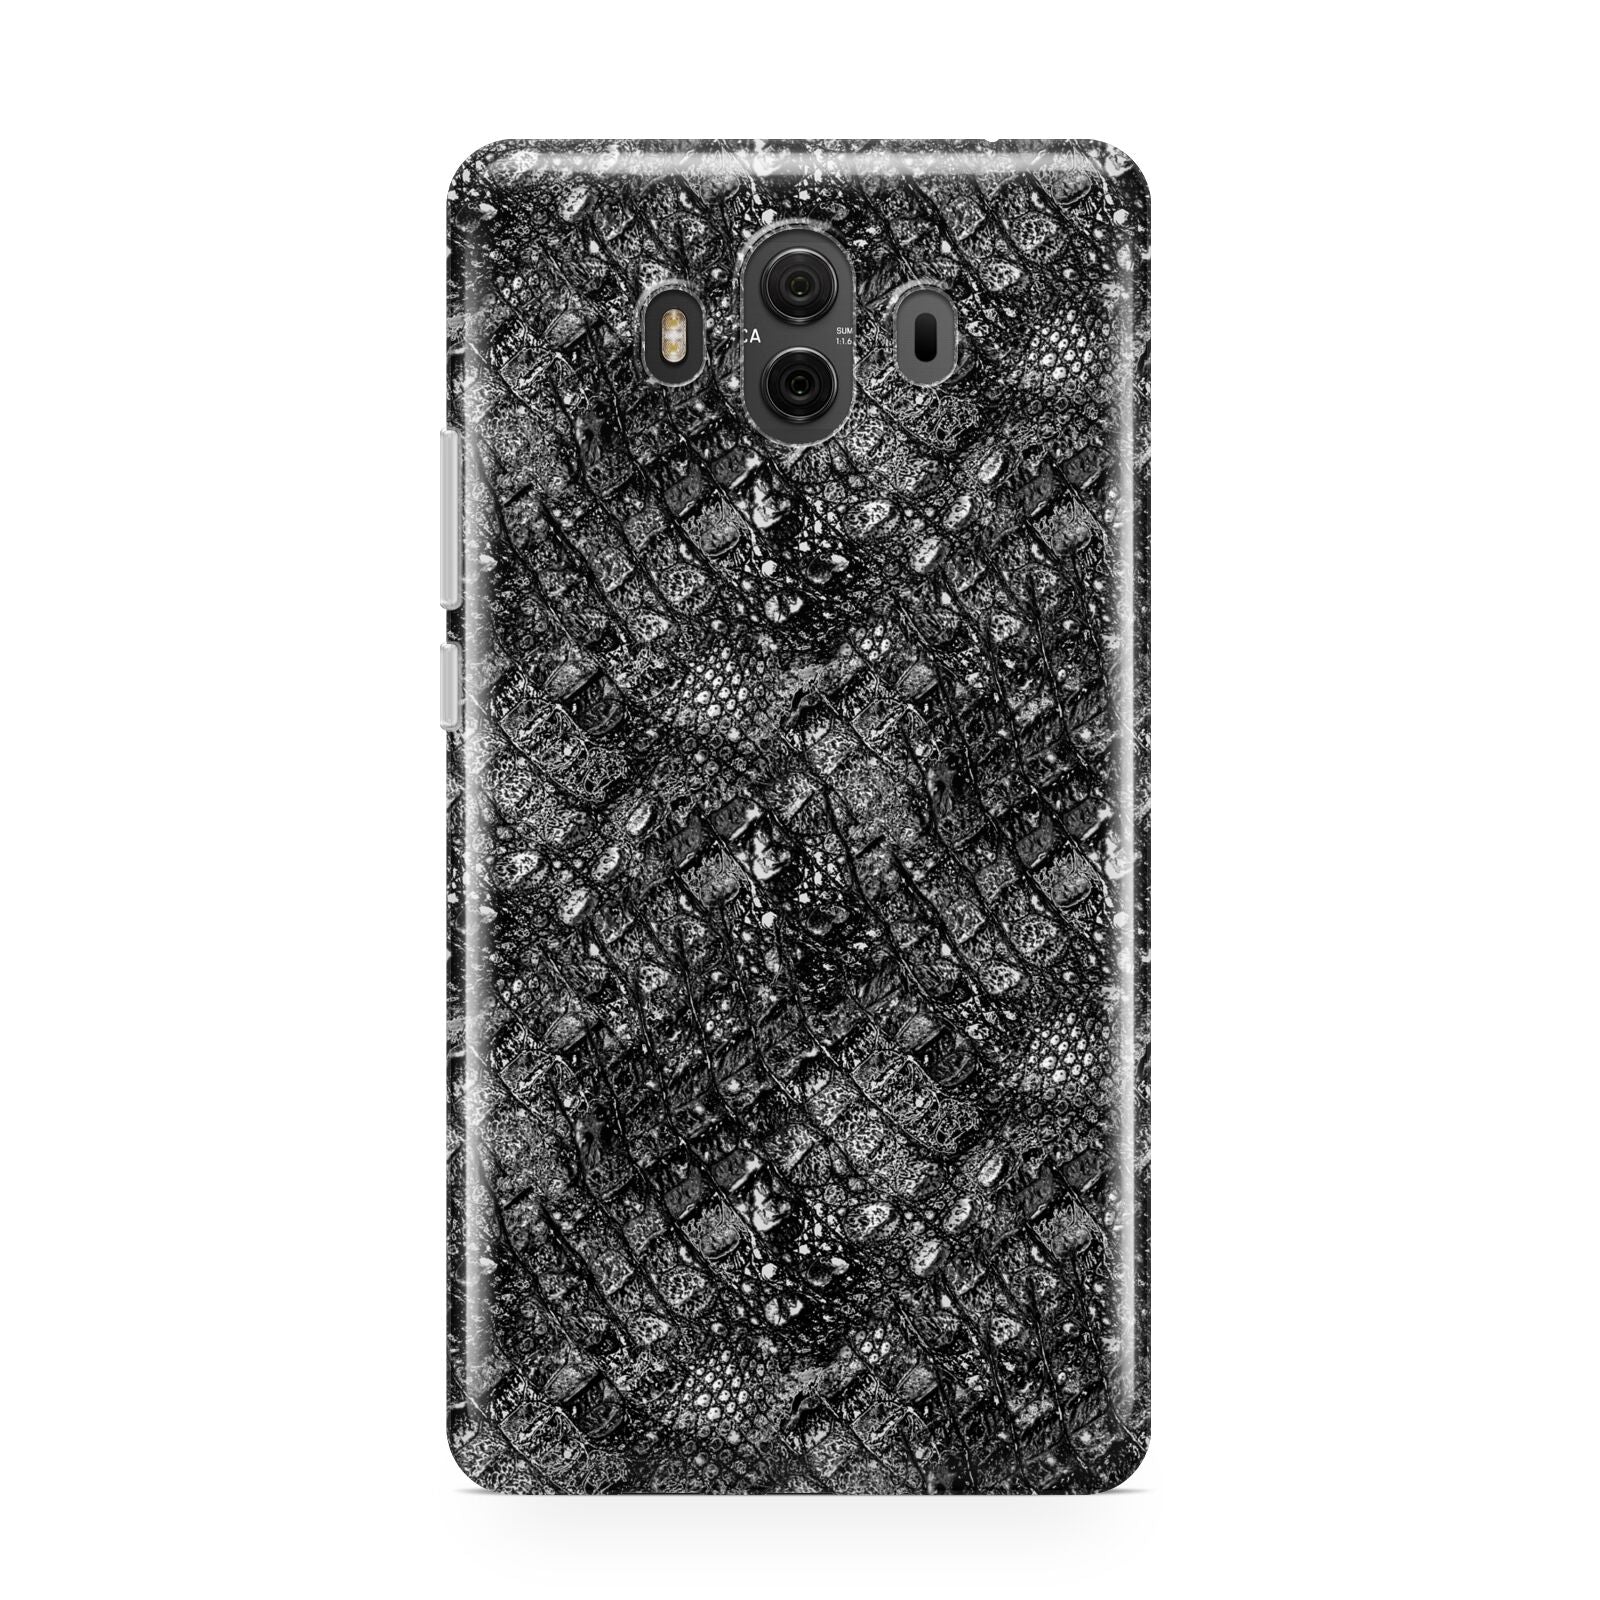 Snakeskin Design Huawei Mate 10 Protective Phone Case